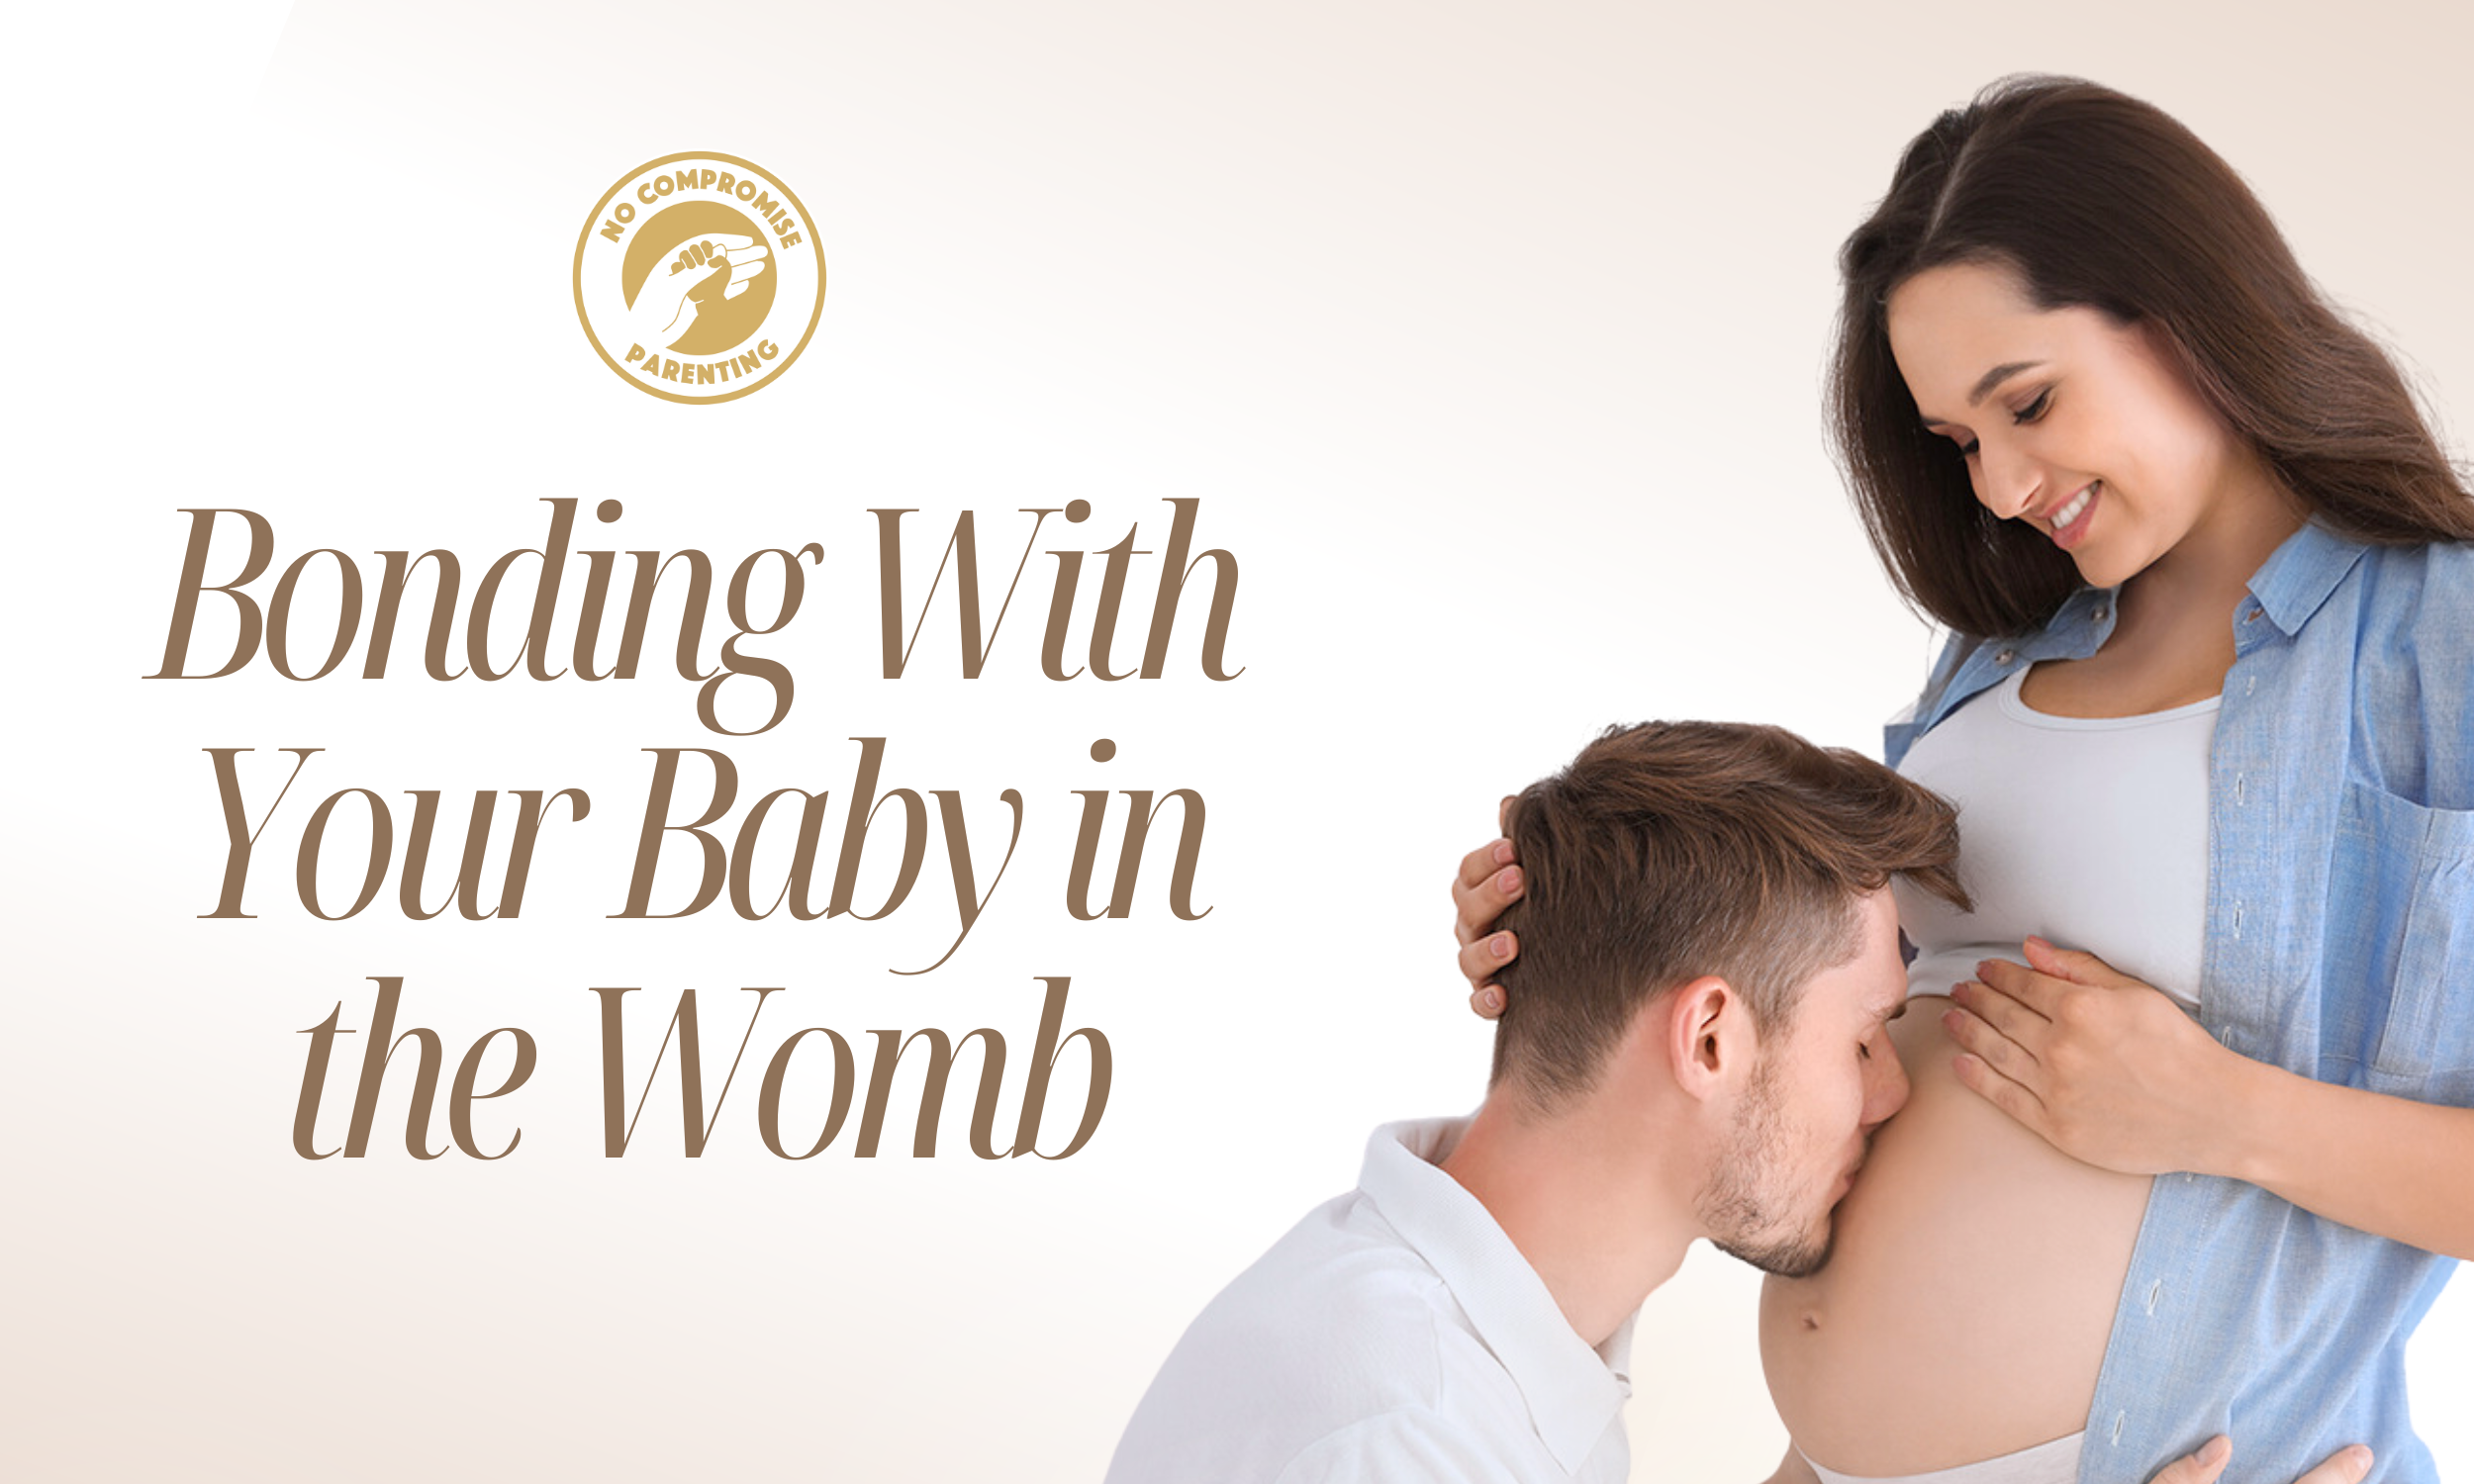 Bonding With Your Baby in the Womb